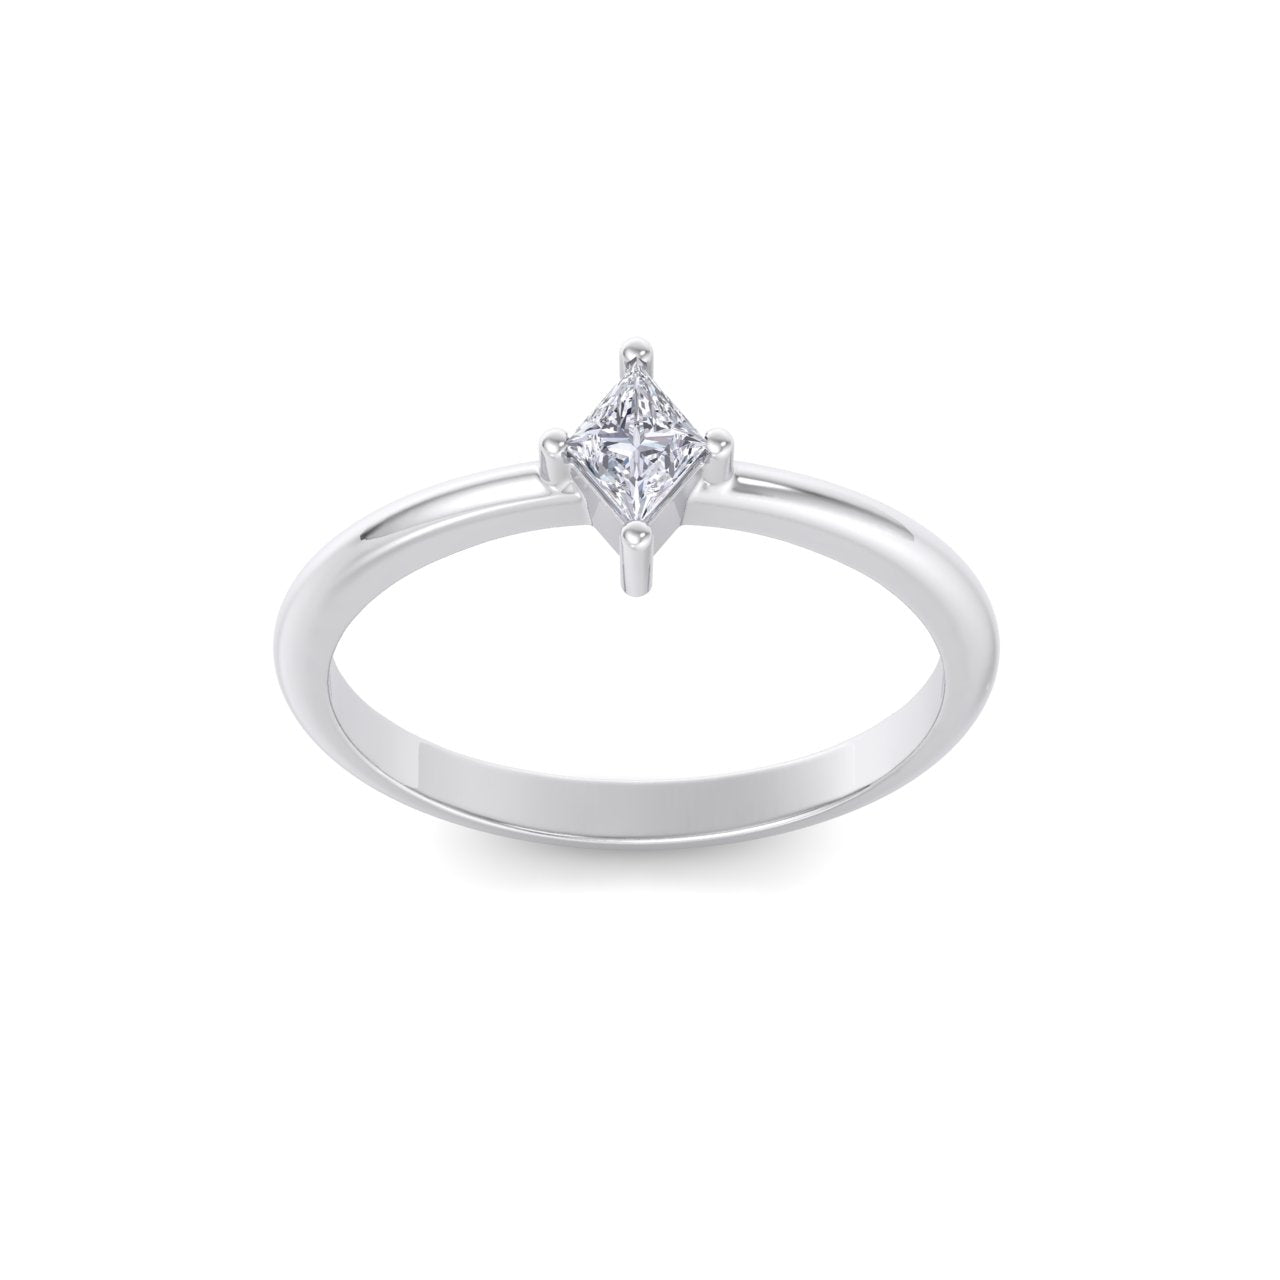 Petite Diamond ring in white gold with white diamonds of 0.25 ct in weight